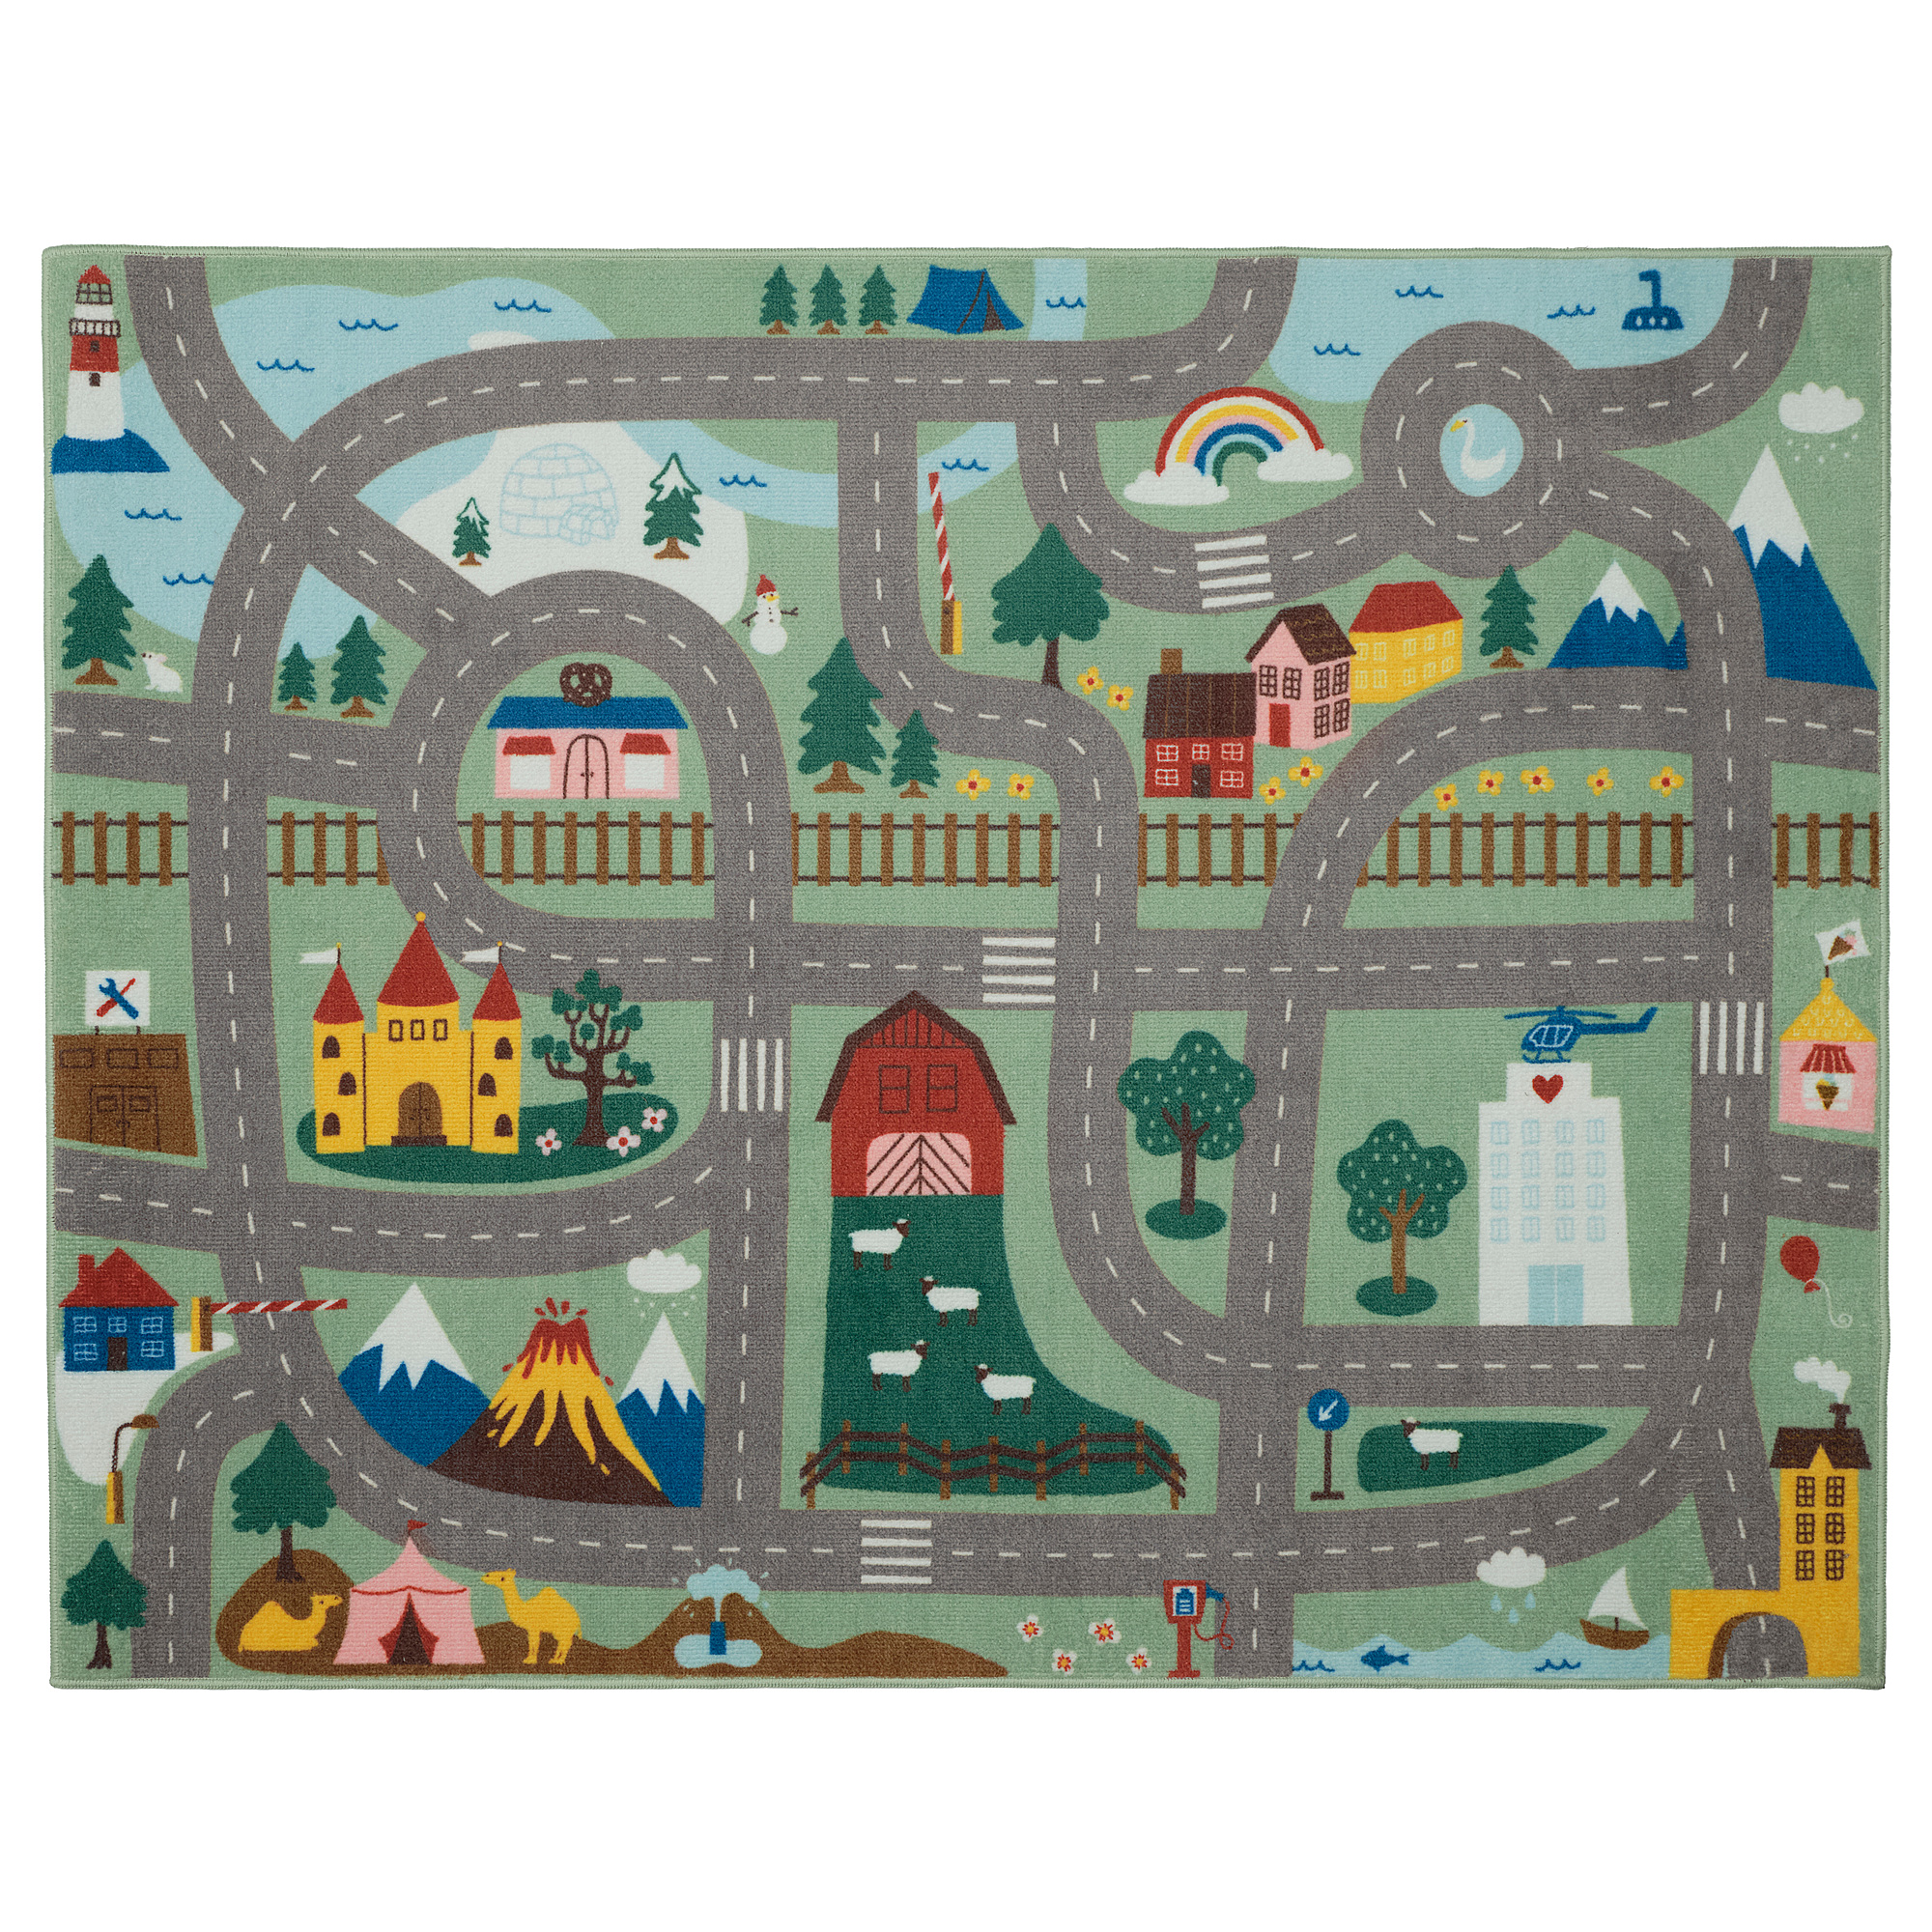 VALLABY rug